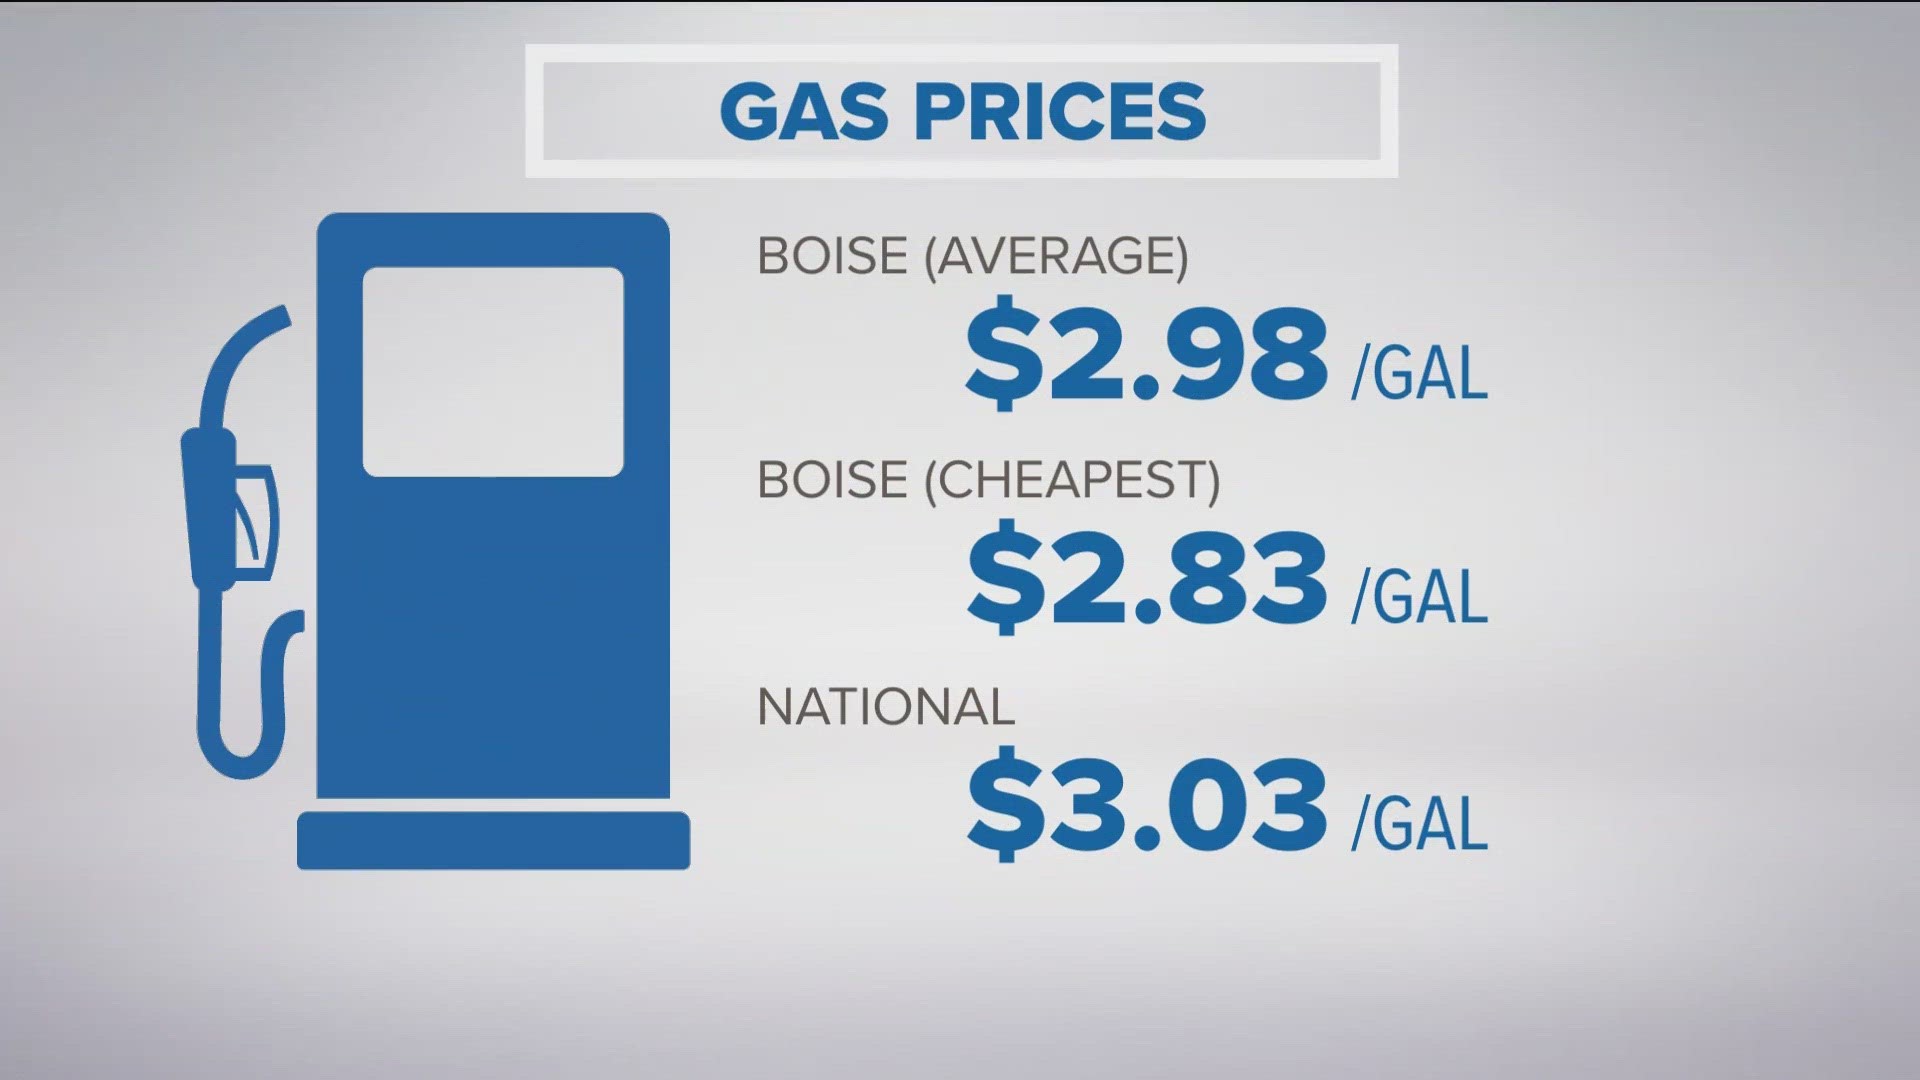 With a 9.7-cent dip, Boise is seeing an average gas price of $2.98 per gallon.